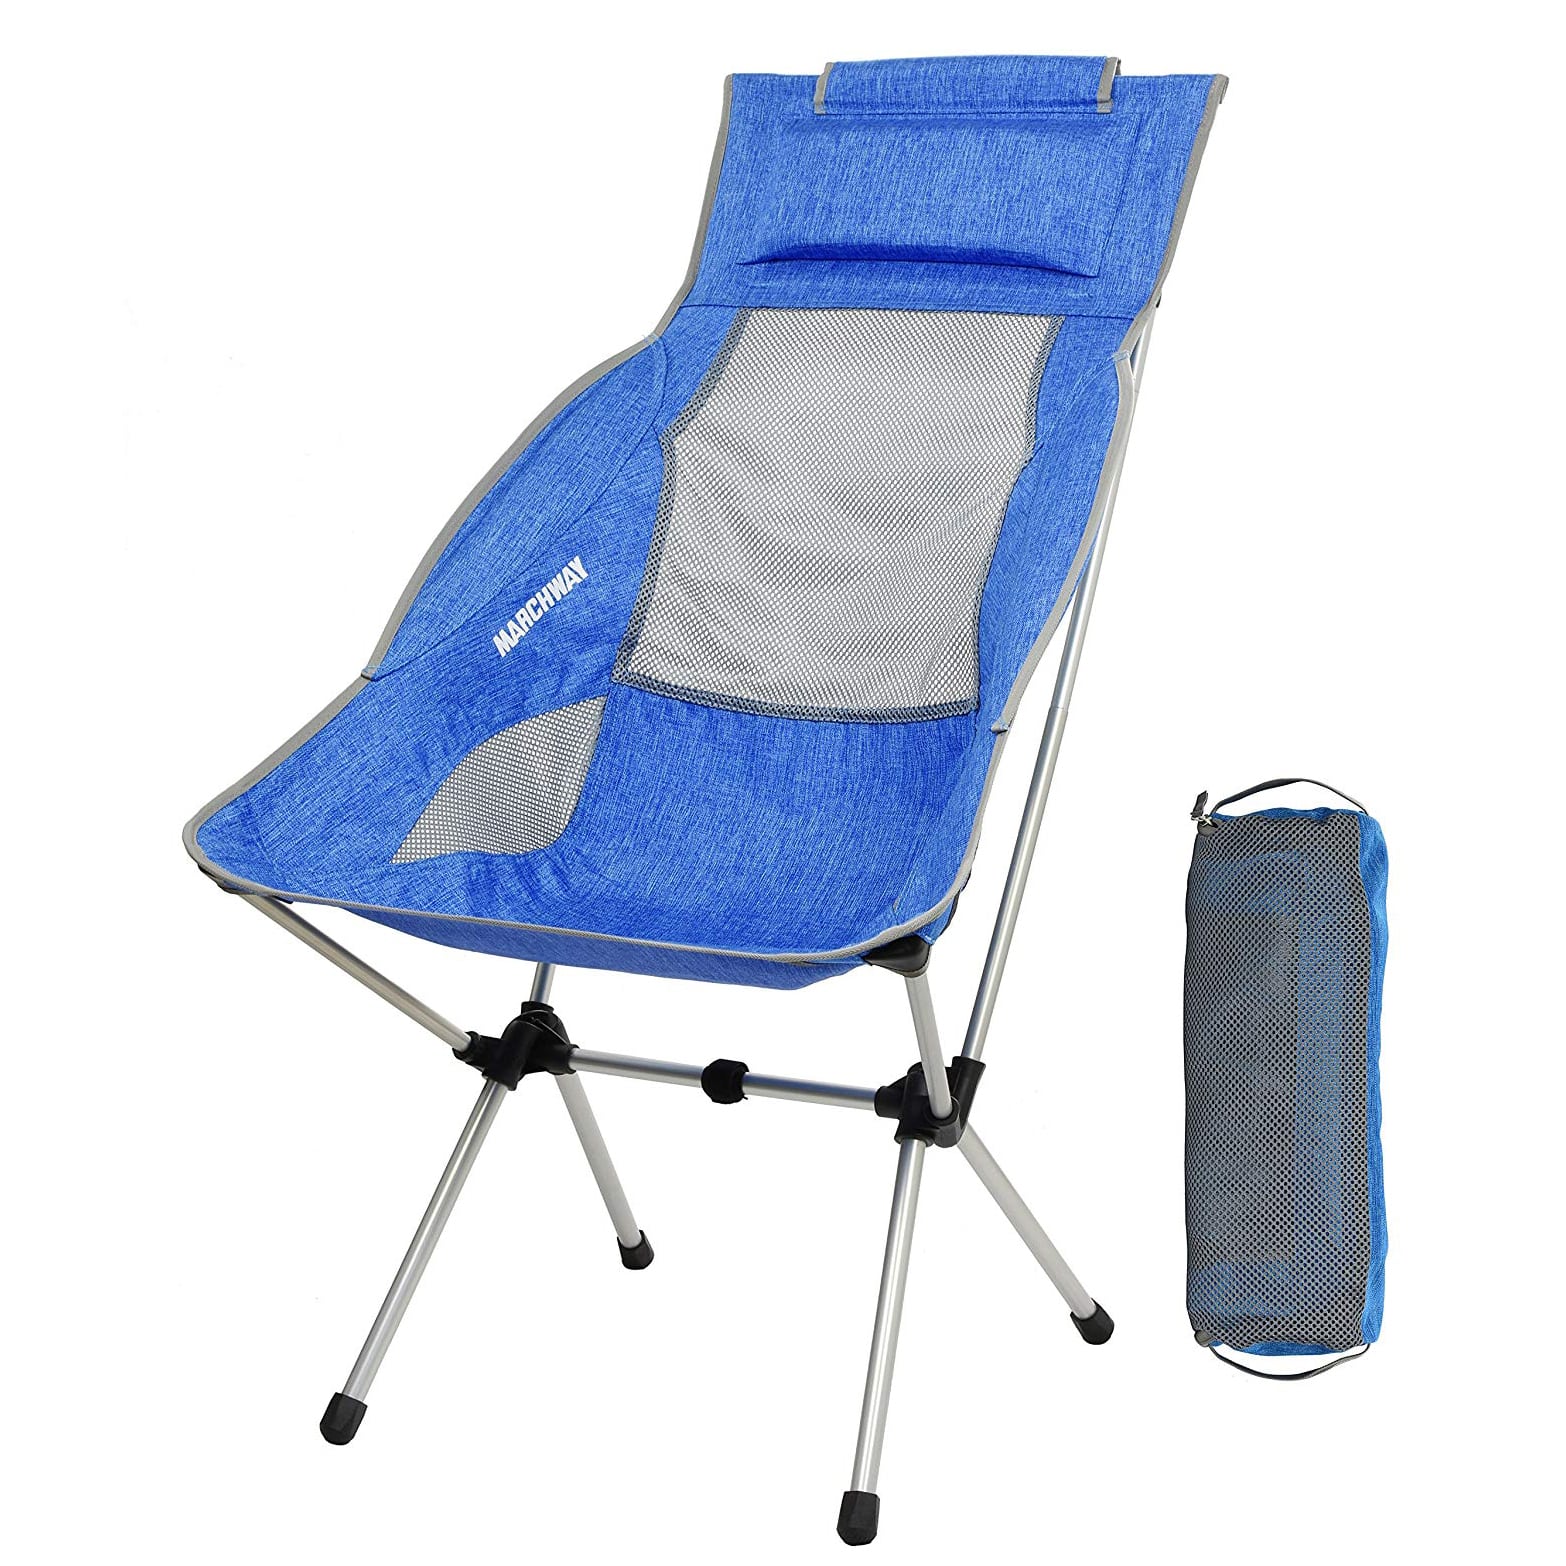 Top 10 Best Lightweight Camping Chairs in 2022 Reviews | Guide